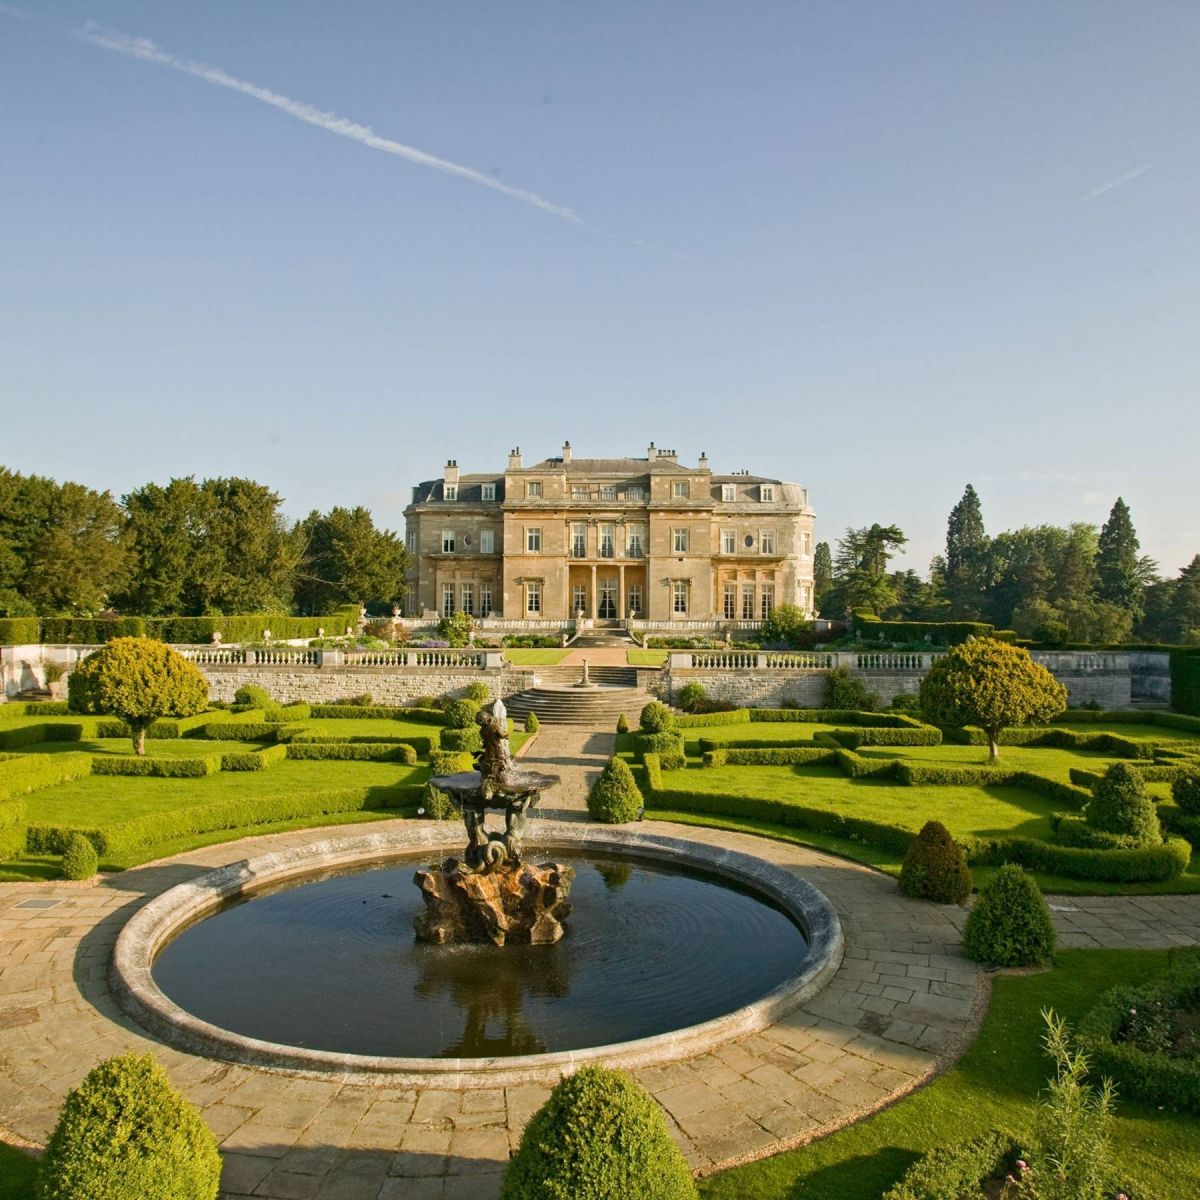 Luton Hoo - 25 minutes from Canonbury Antiques